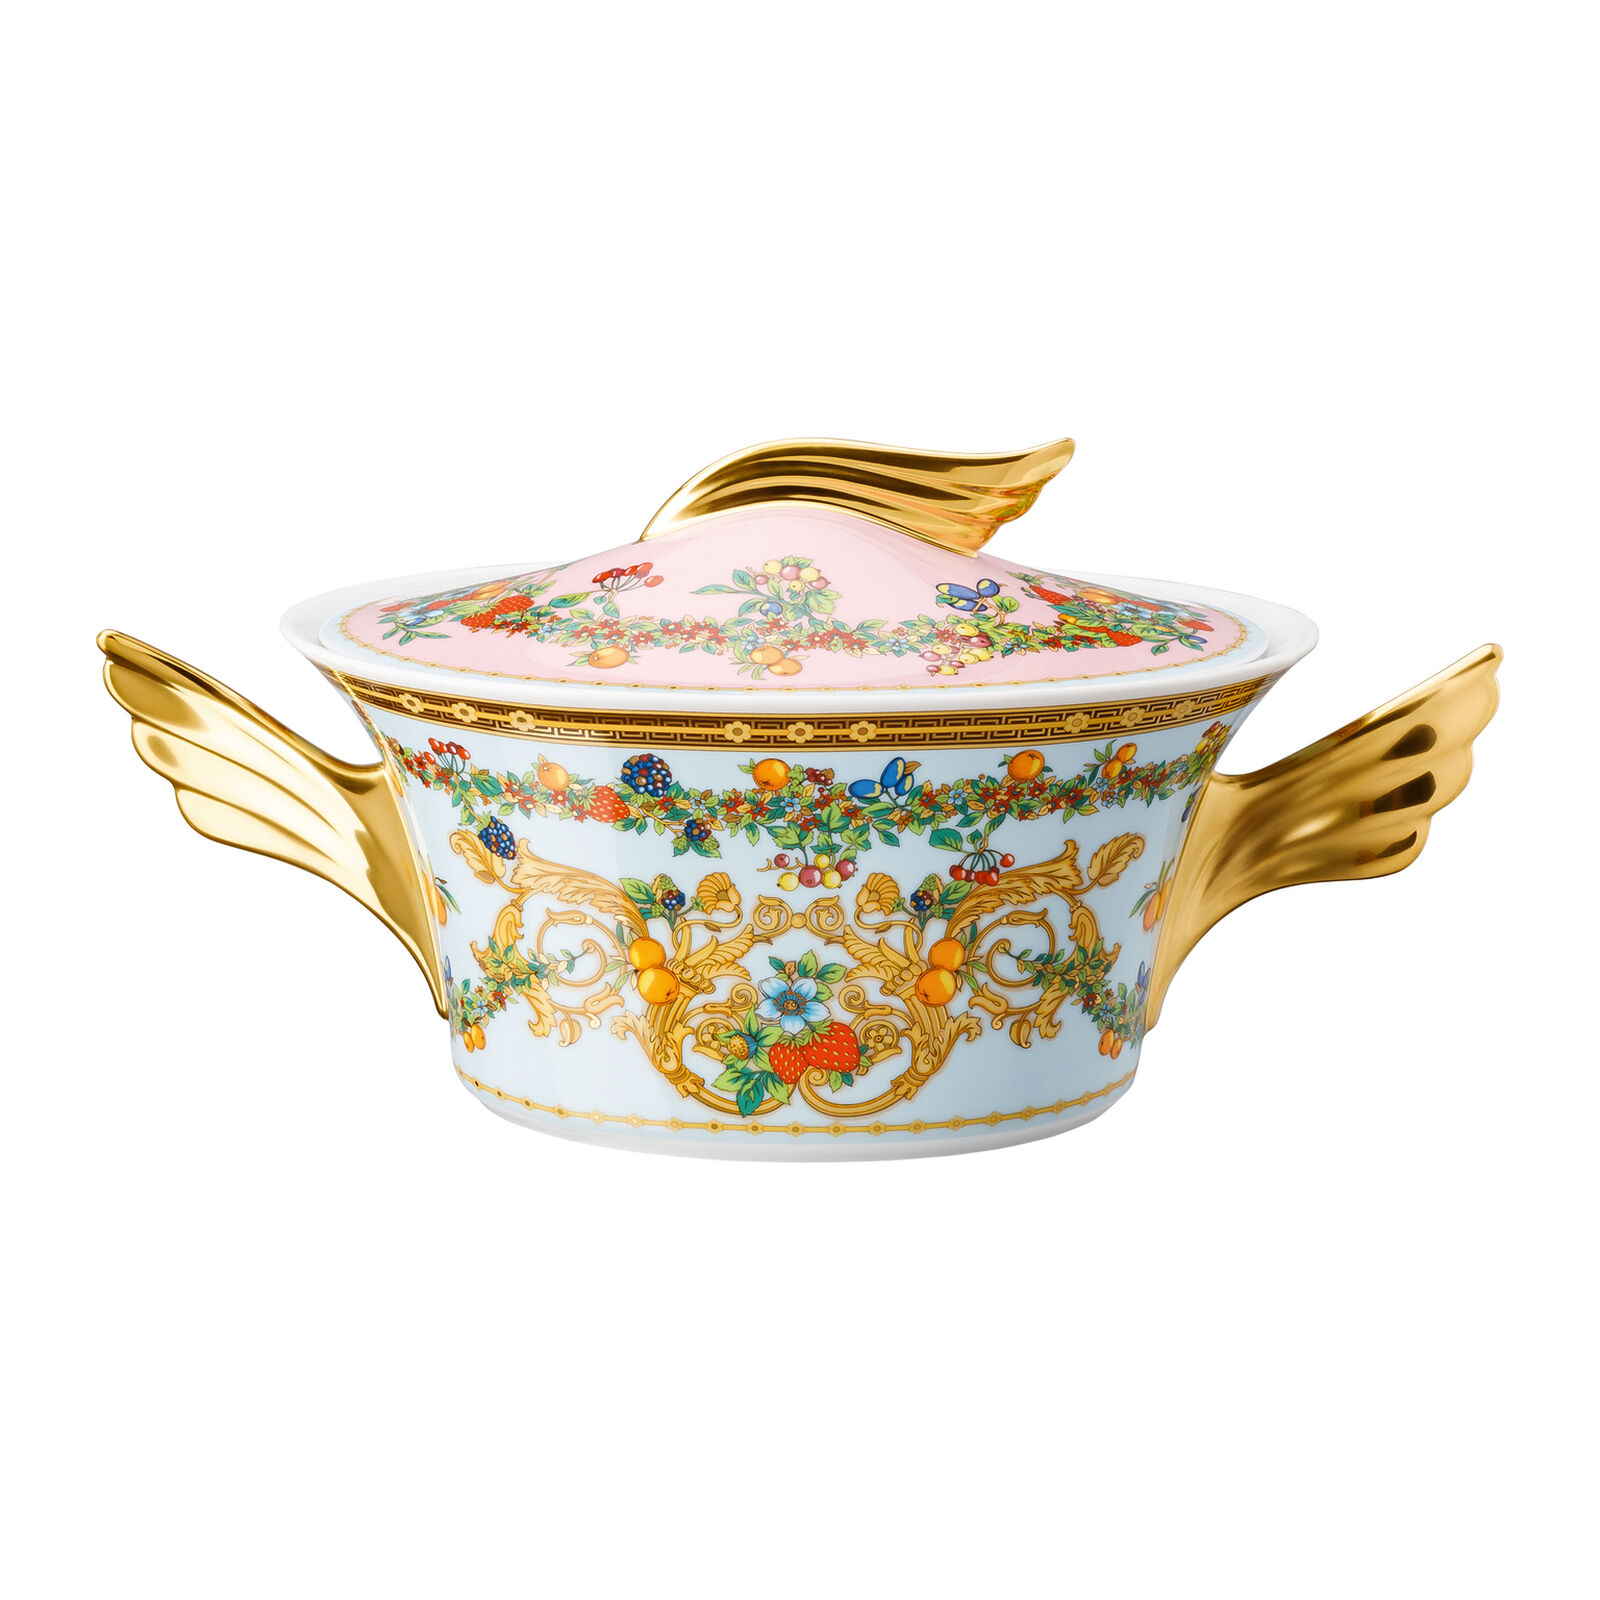 wedding registry ideas Versace Butterfly Garden collection covered vegetable bowl from Gearys